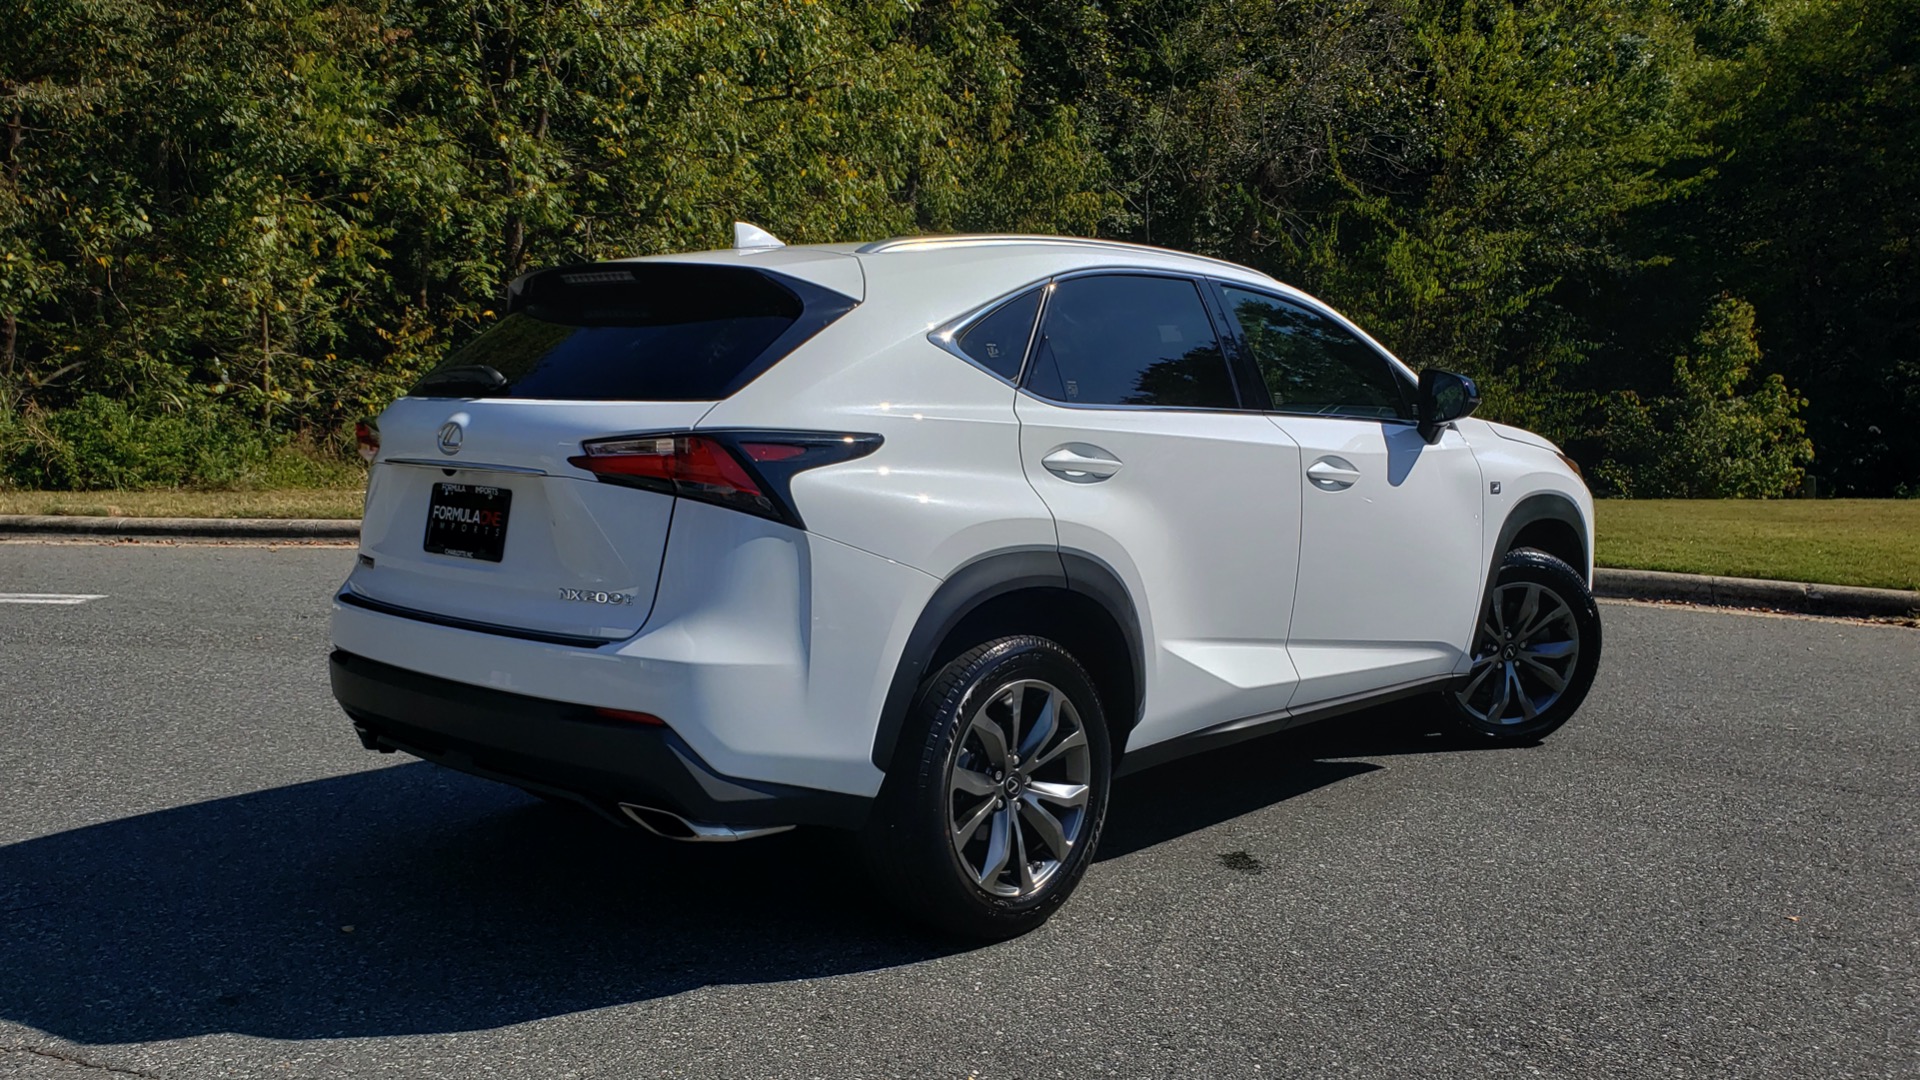 Used 2016 Lexus NX 200t F-SPORT / BACK-UP CAMERA / 18 INCH WHEELS for sale Sold at Formula Imports in Charlotte NC 28227 8